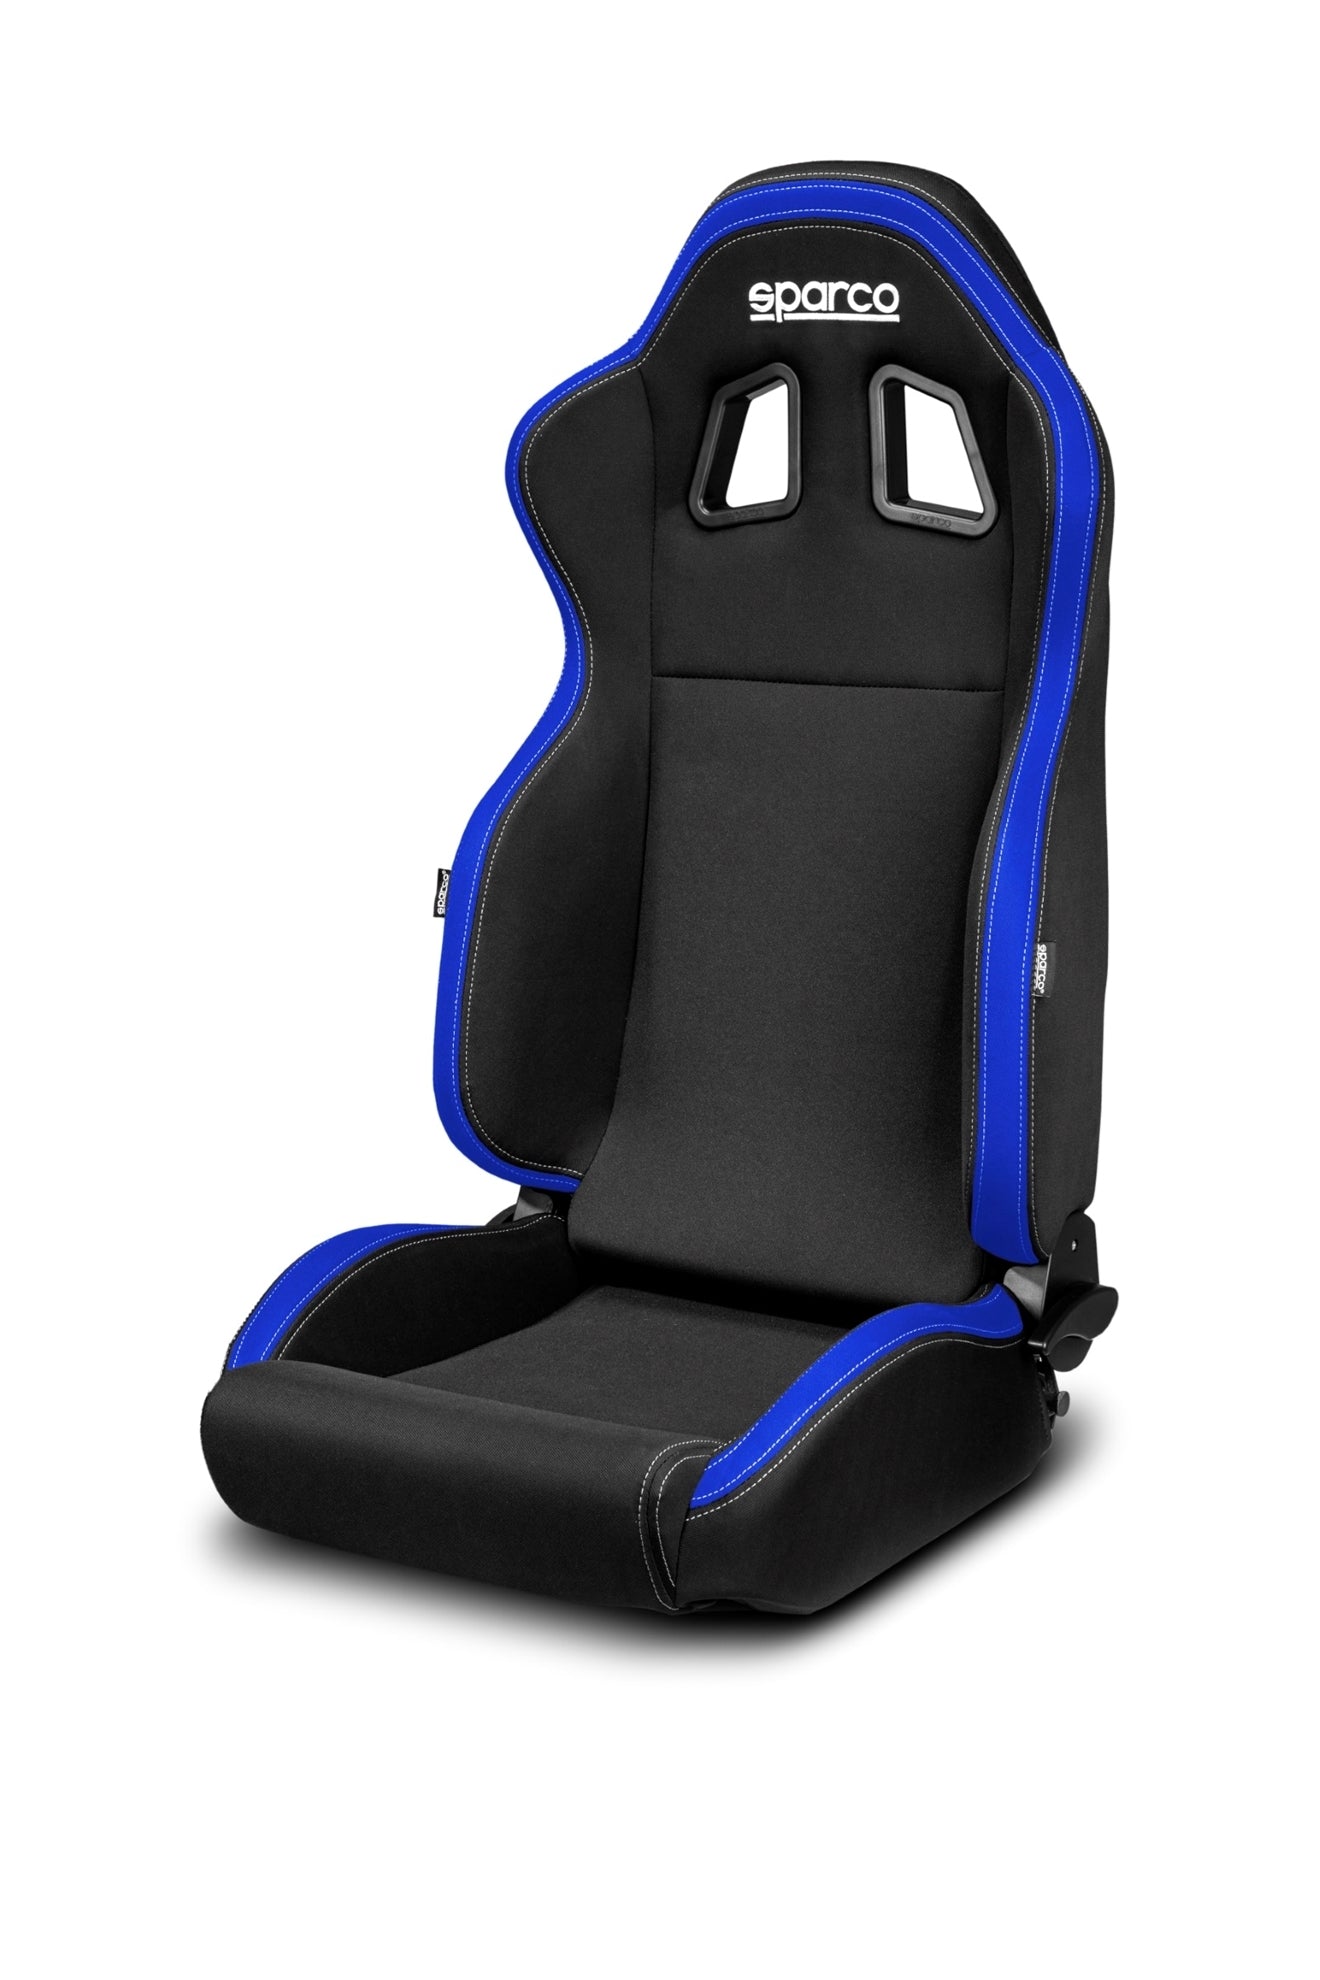 Sparco R100 Reclinable Steel Model Seat Black/Blue - Universal - Dirty Racing Products